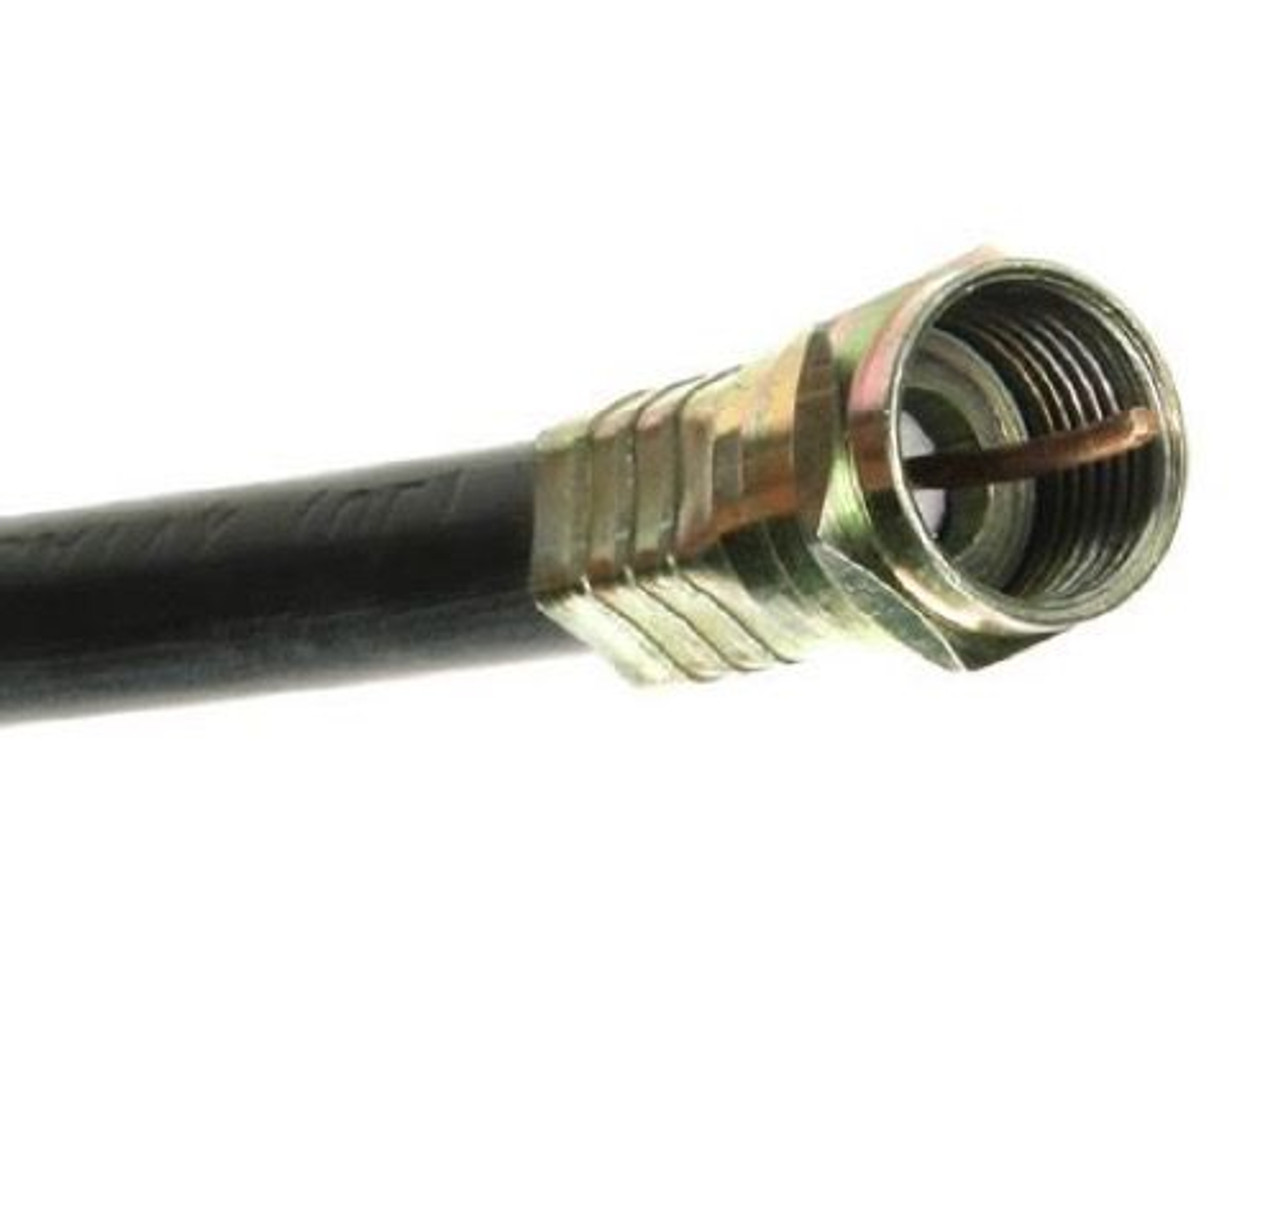 Eagle 200' FT RG6 Coaxial Cable Black with Gold F Connector Installed Each End RG-6 F to F 3 GHz Copper Clad Audio Video Signal 75 Ohm Component Shielded Connector HDTV Jumper